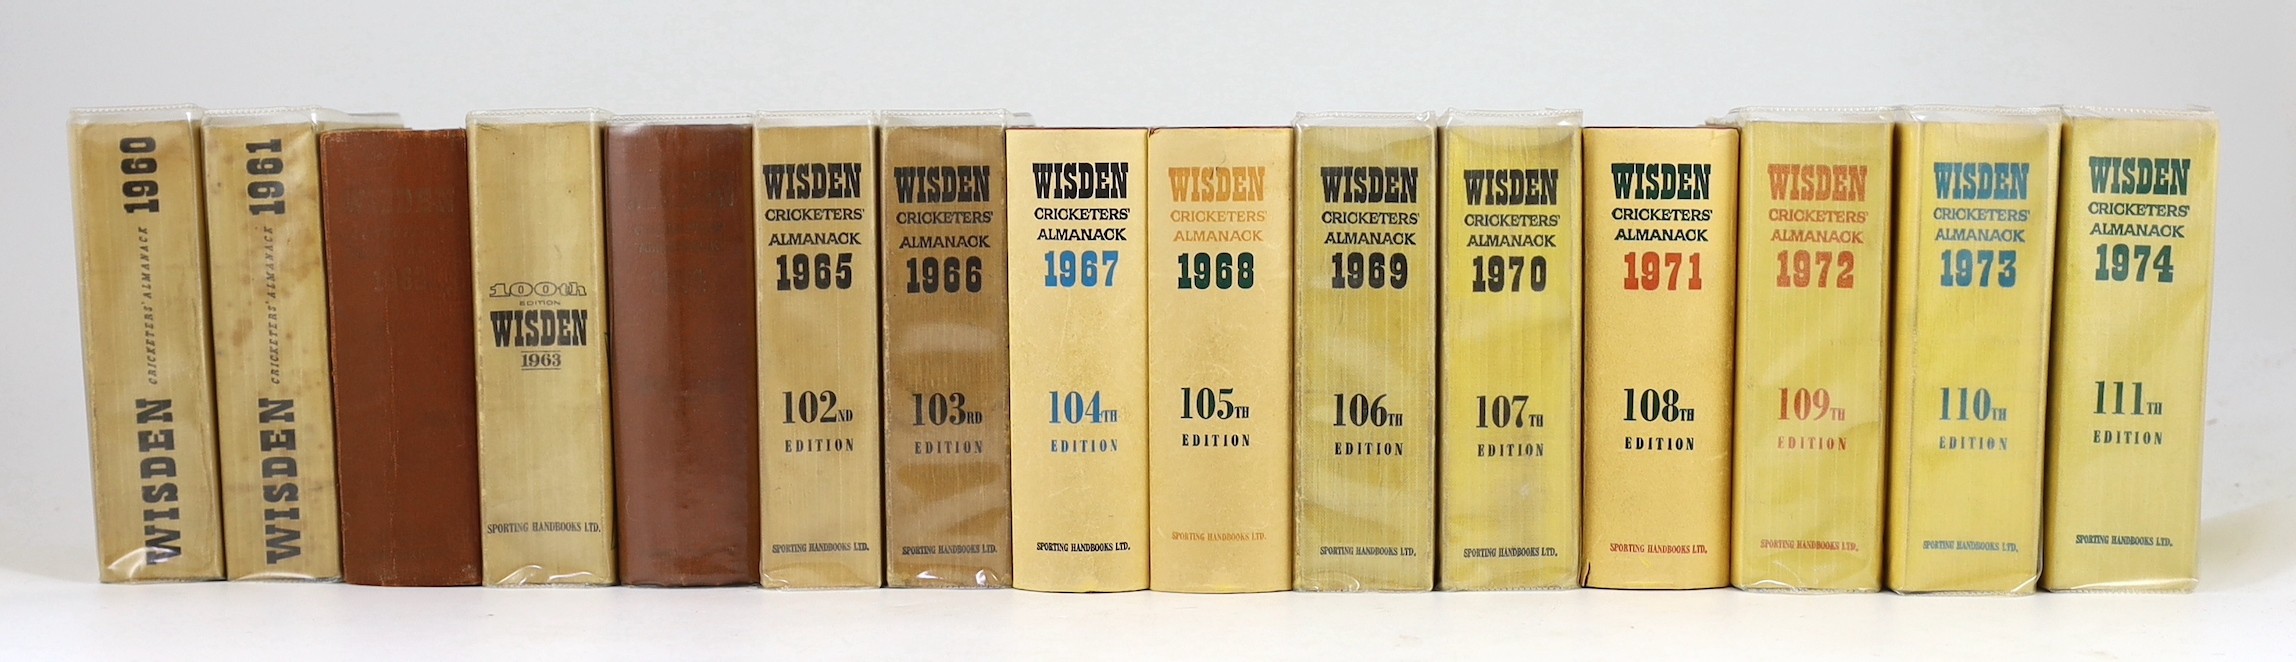 Wisden, John - Cricketers Almanack for the years 1960 (97th edition) - 1974 (111th edition), original hardbacks for, 1962, 1964, and, with dust jackets, 1967-68 and 1971, with original limp cloth wrappers for 1960-61, ce